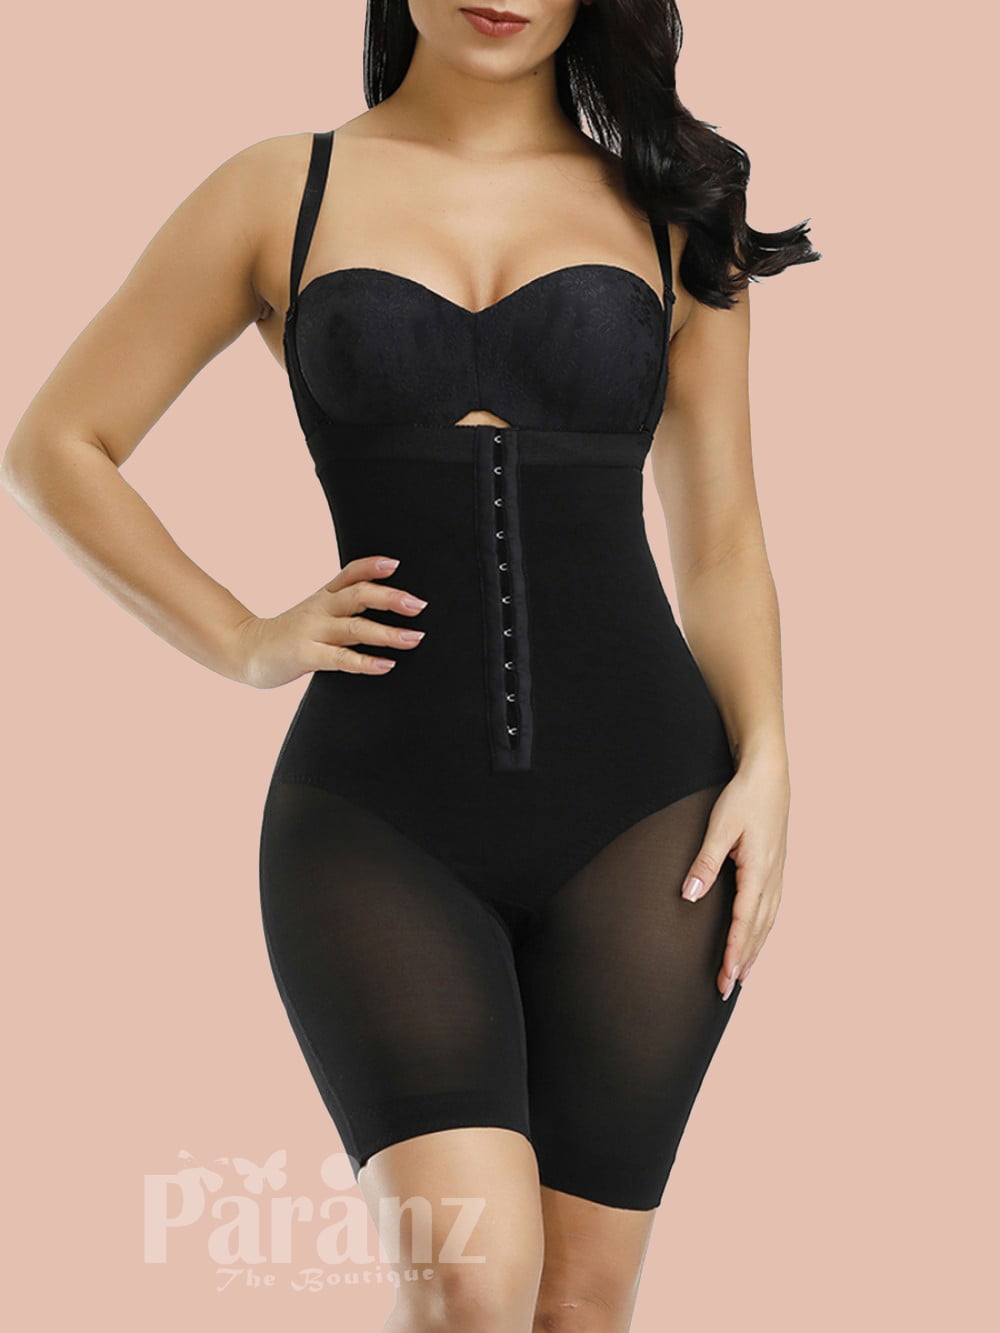 Hooks and Eyes Superfit Full Body Shaper Perfect Curve Slimming Bodysuit 